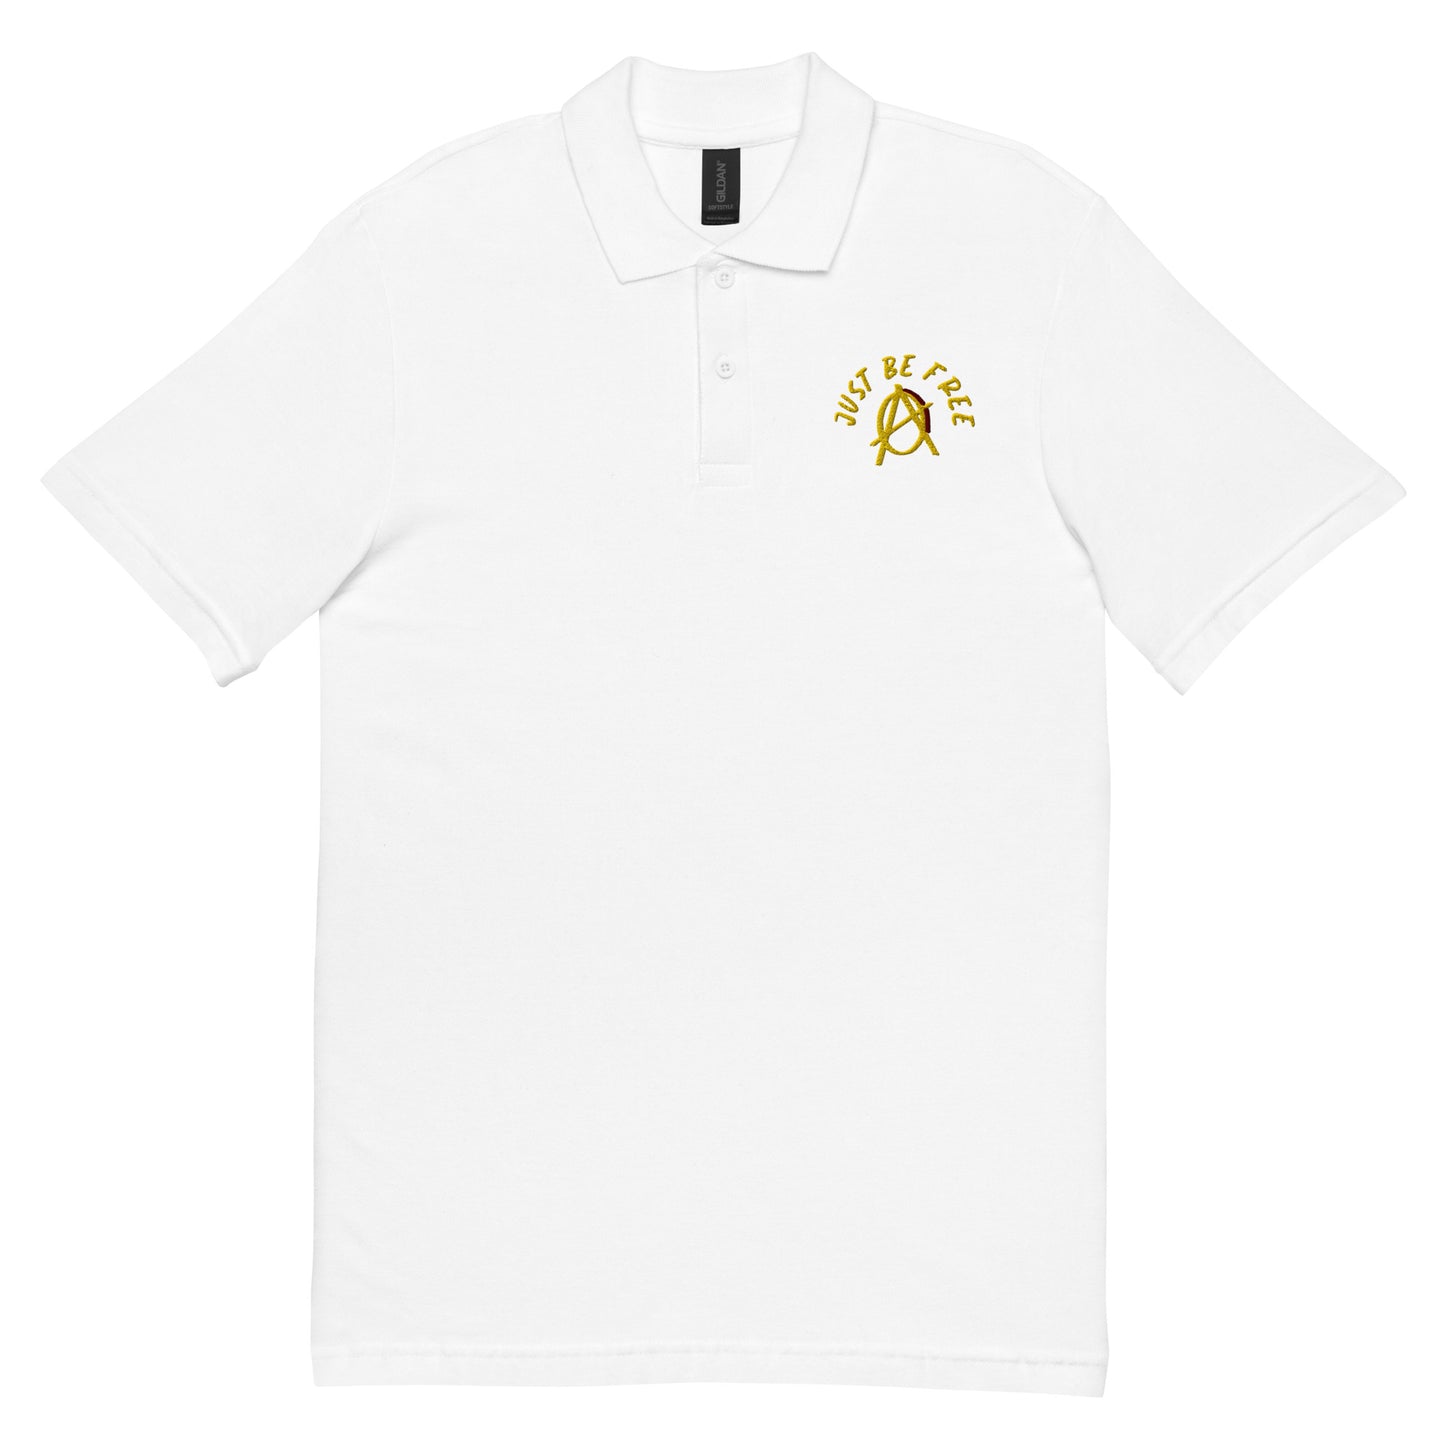 Anarchy Wear "Just Be Free" Unisex pique polo shirt